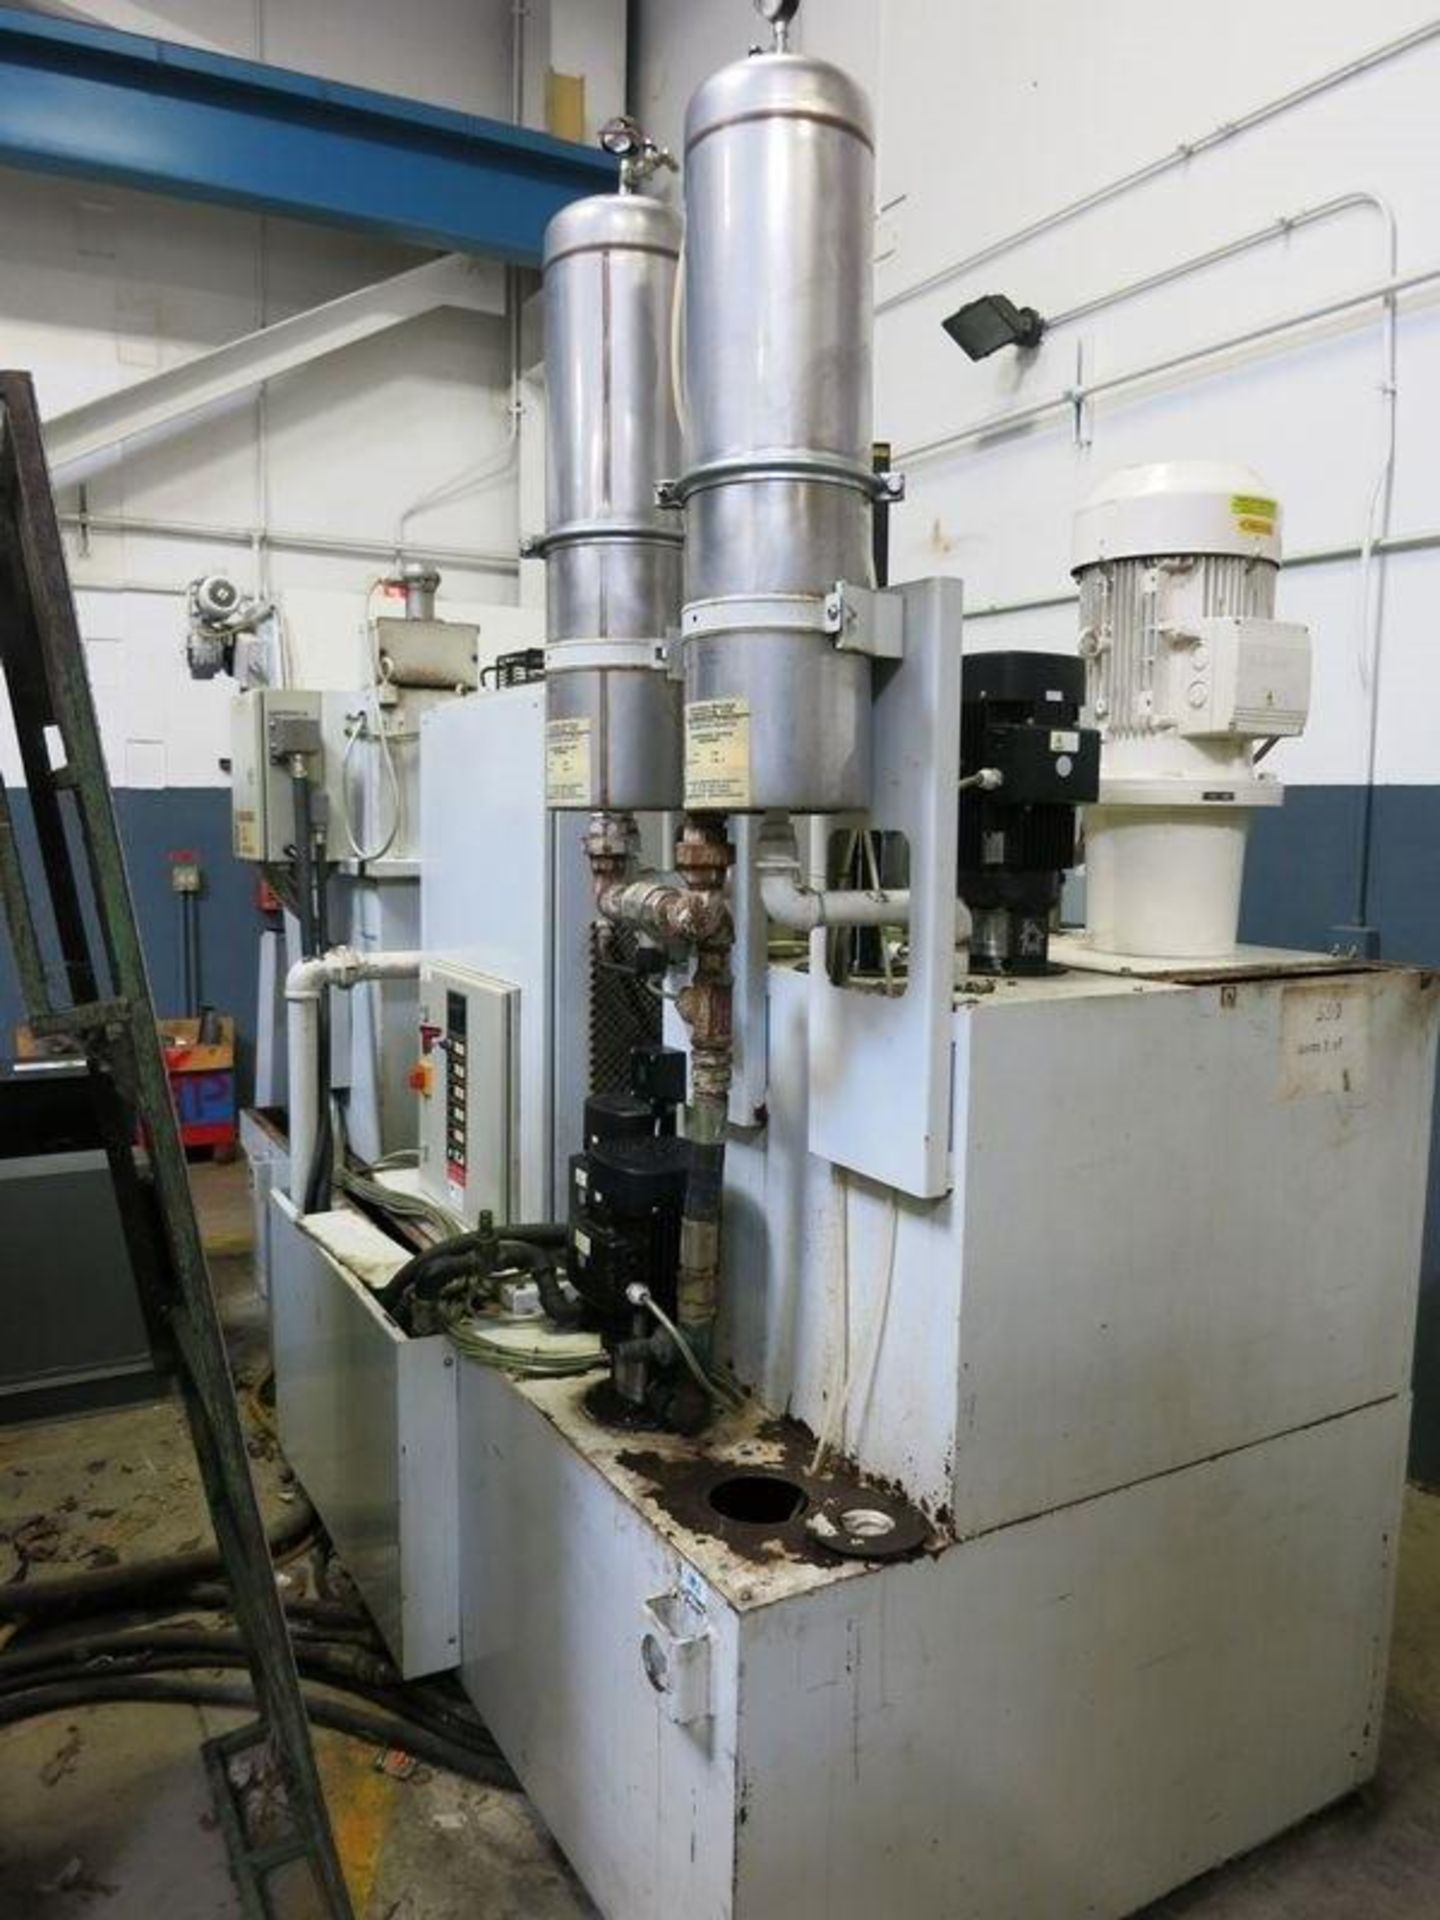 Bridgeport FGC-1000 5-Axis Vertical machining and Flexible Grinding Center for Turbine Blades, S/N - Image 8 of 11